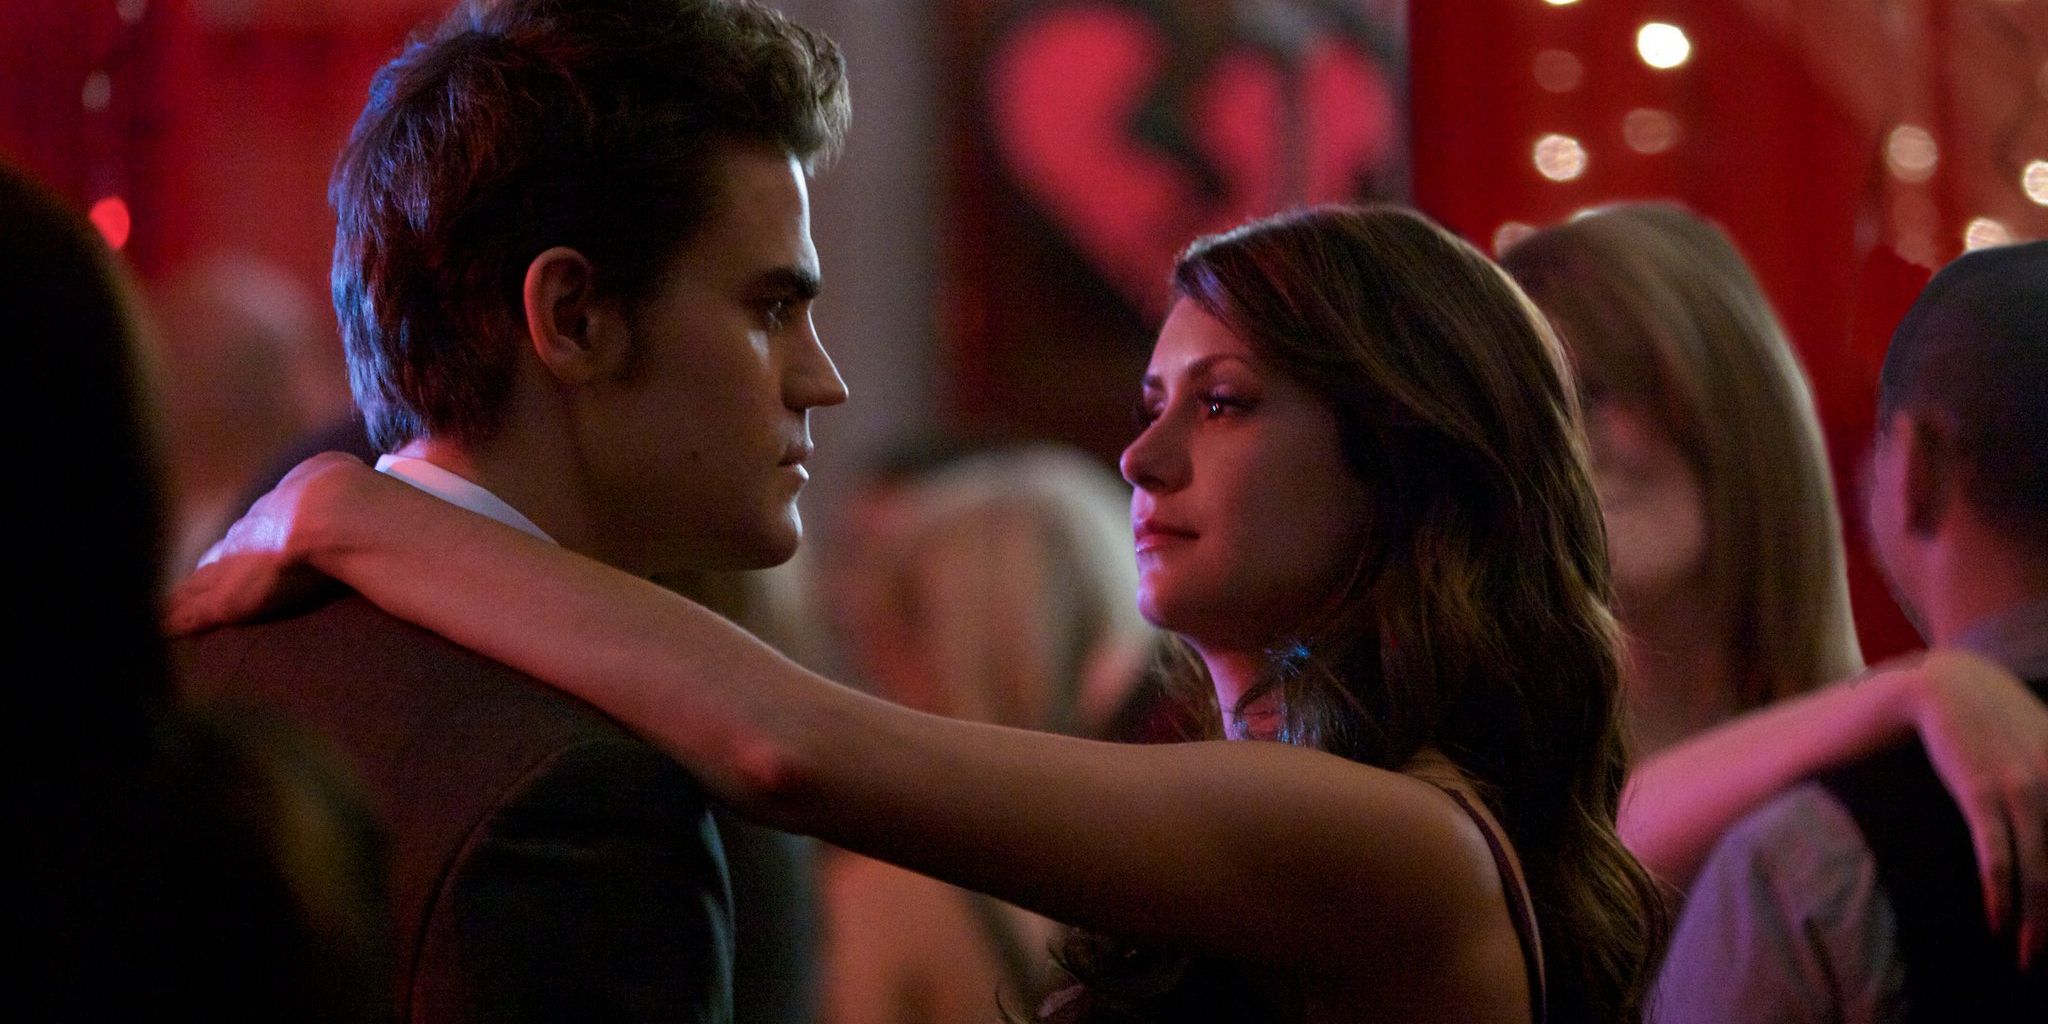 Katherine pretends to be Elena and dances with Stefan in The Vampire Diaries.